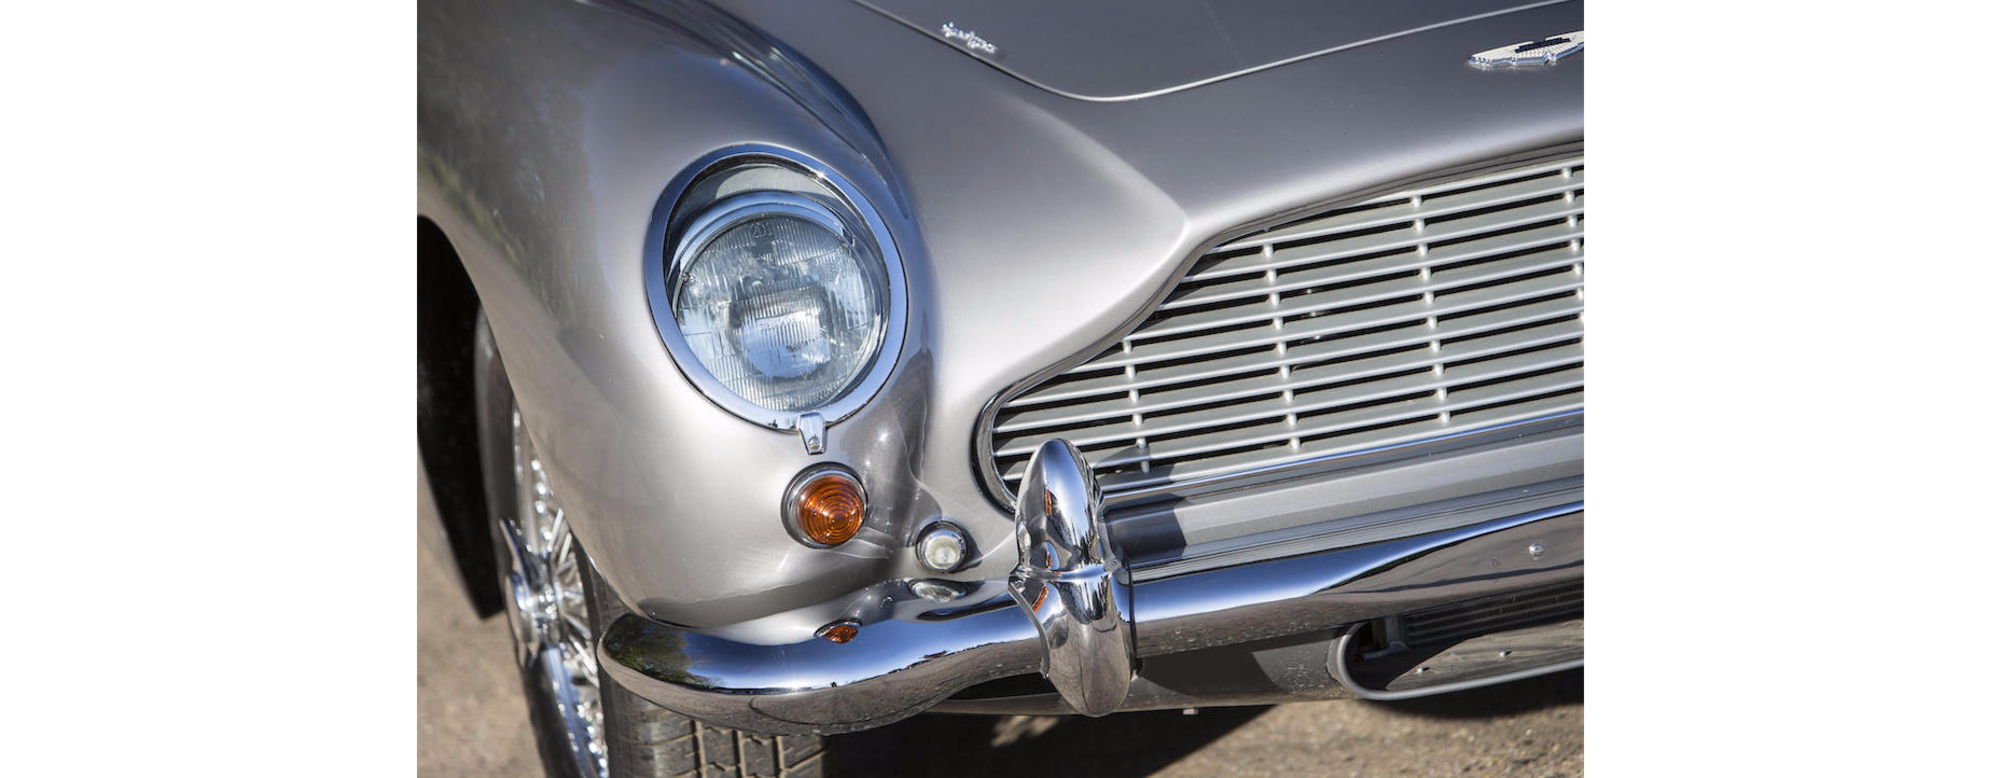 This Aston Martin for children might cost more than your real car